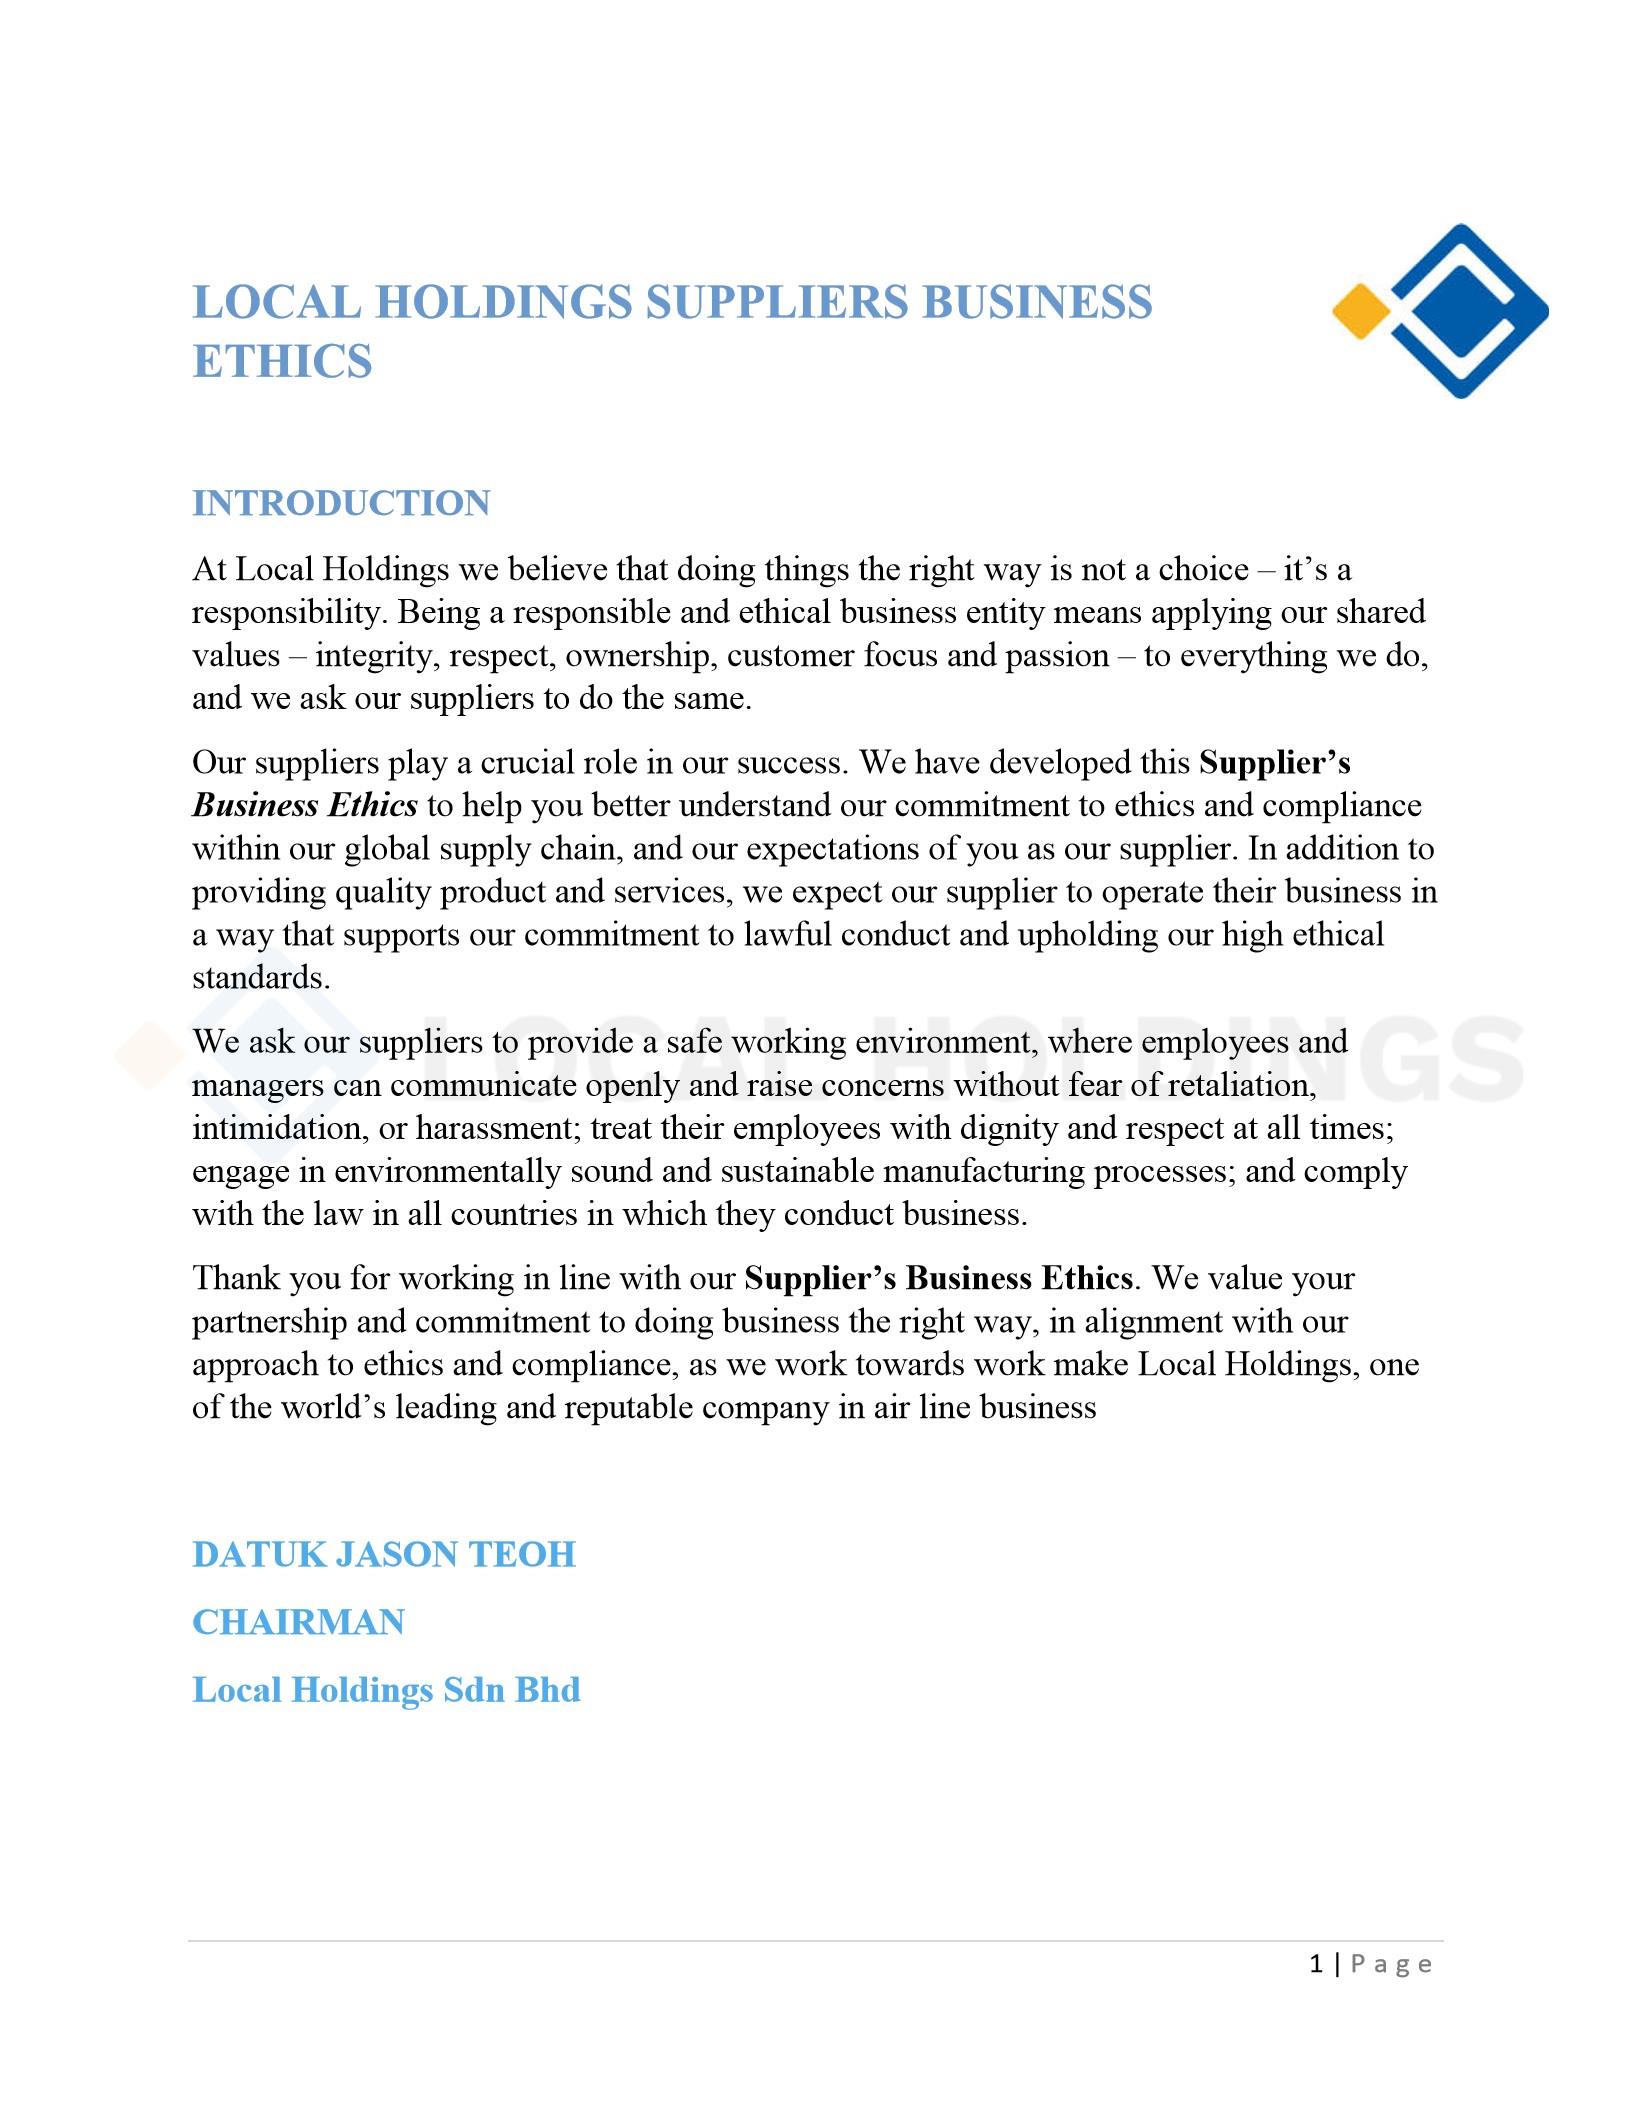 Local Holdings Suppliers Business Ethics